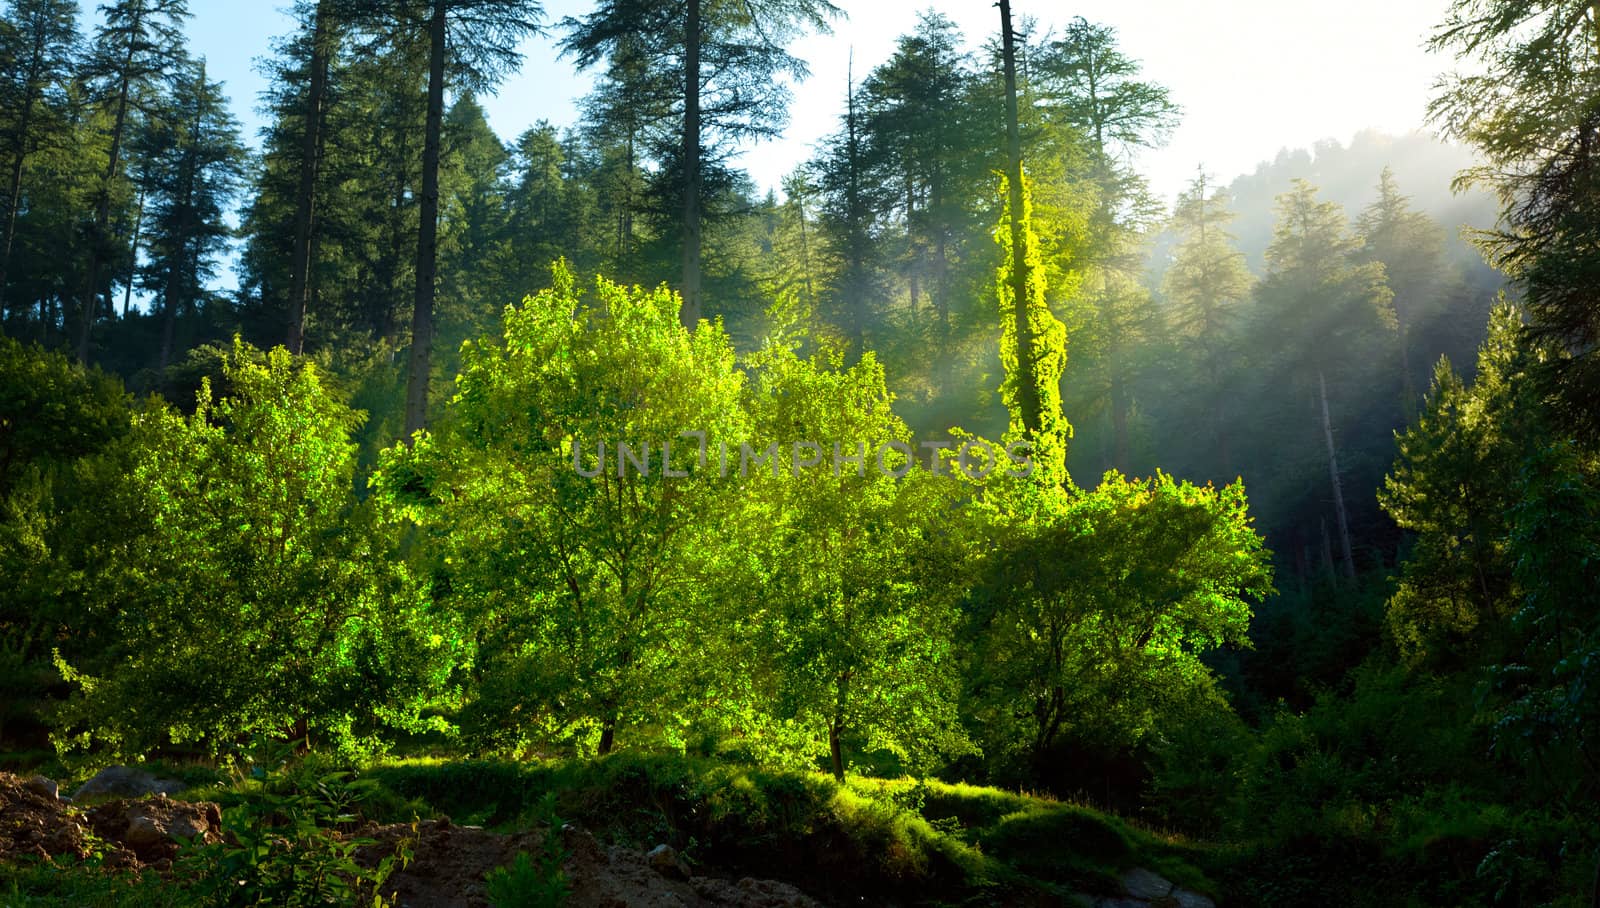 Morning forest with sunrays